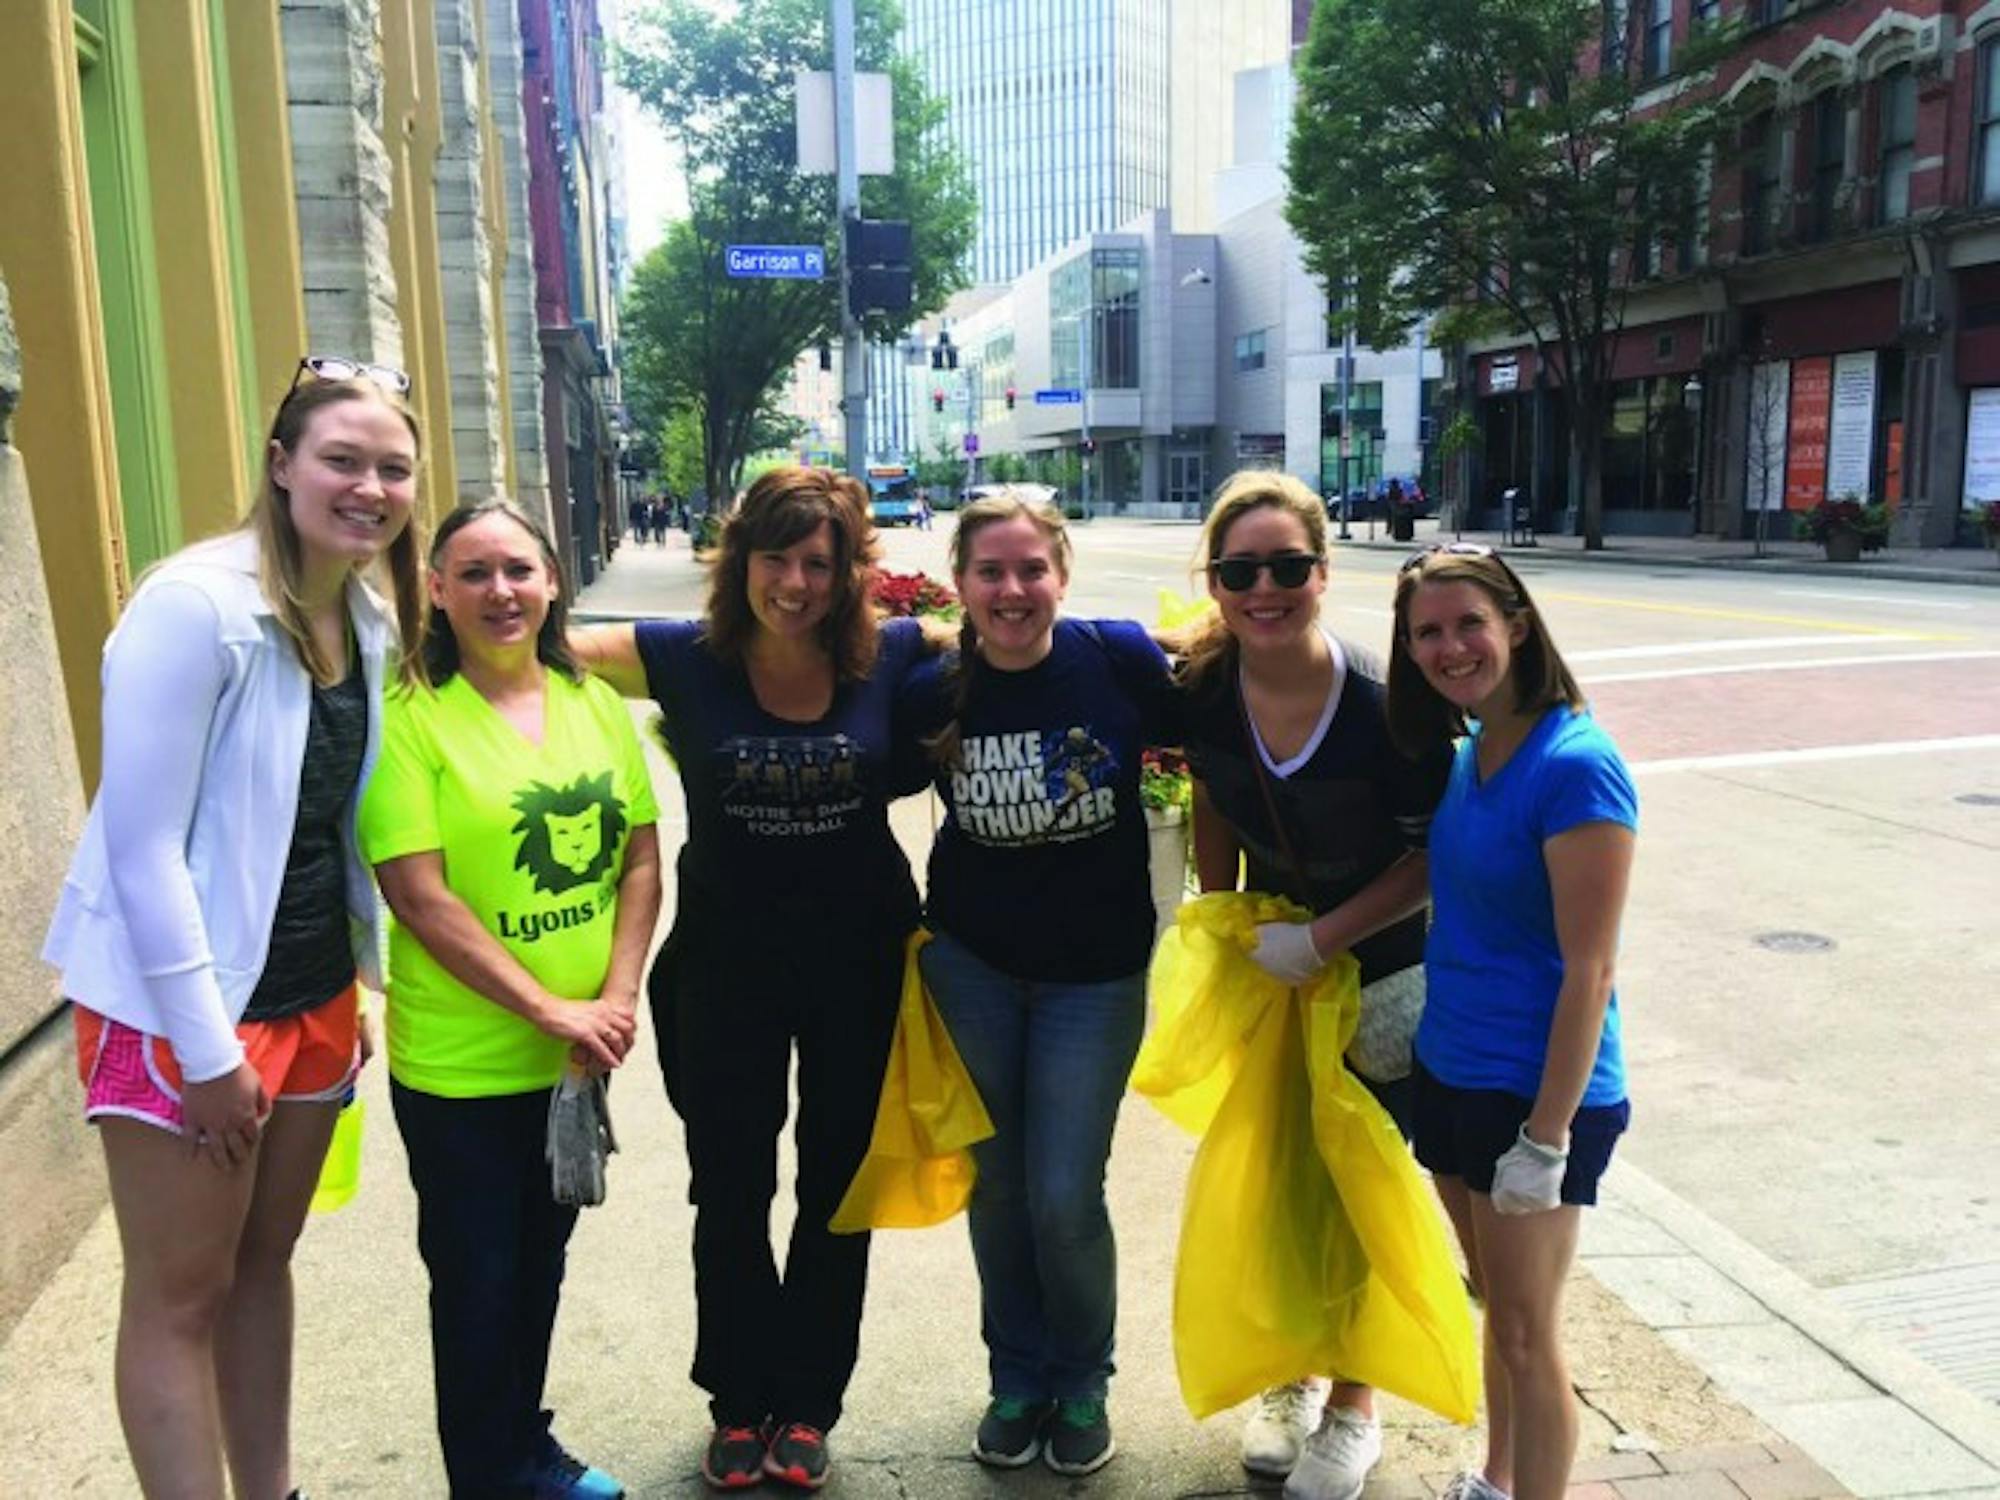 Members of the Notre Dame Club of Pittsburgh gather to complete community service before a Notre Dame football game.